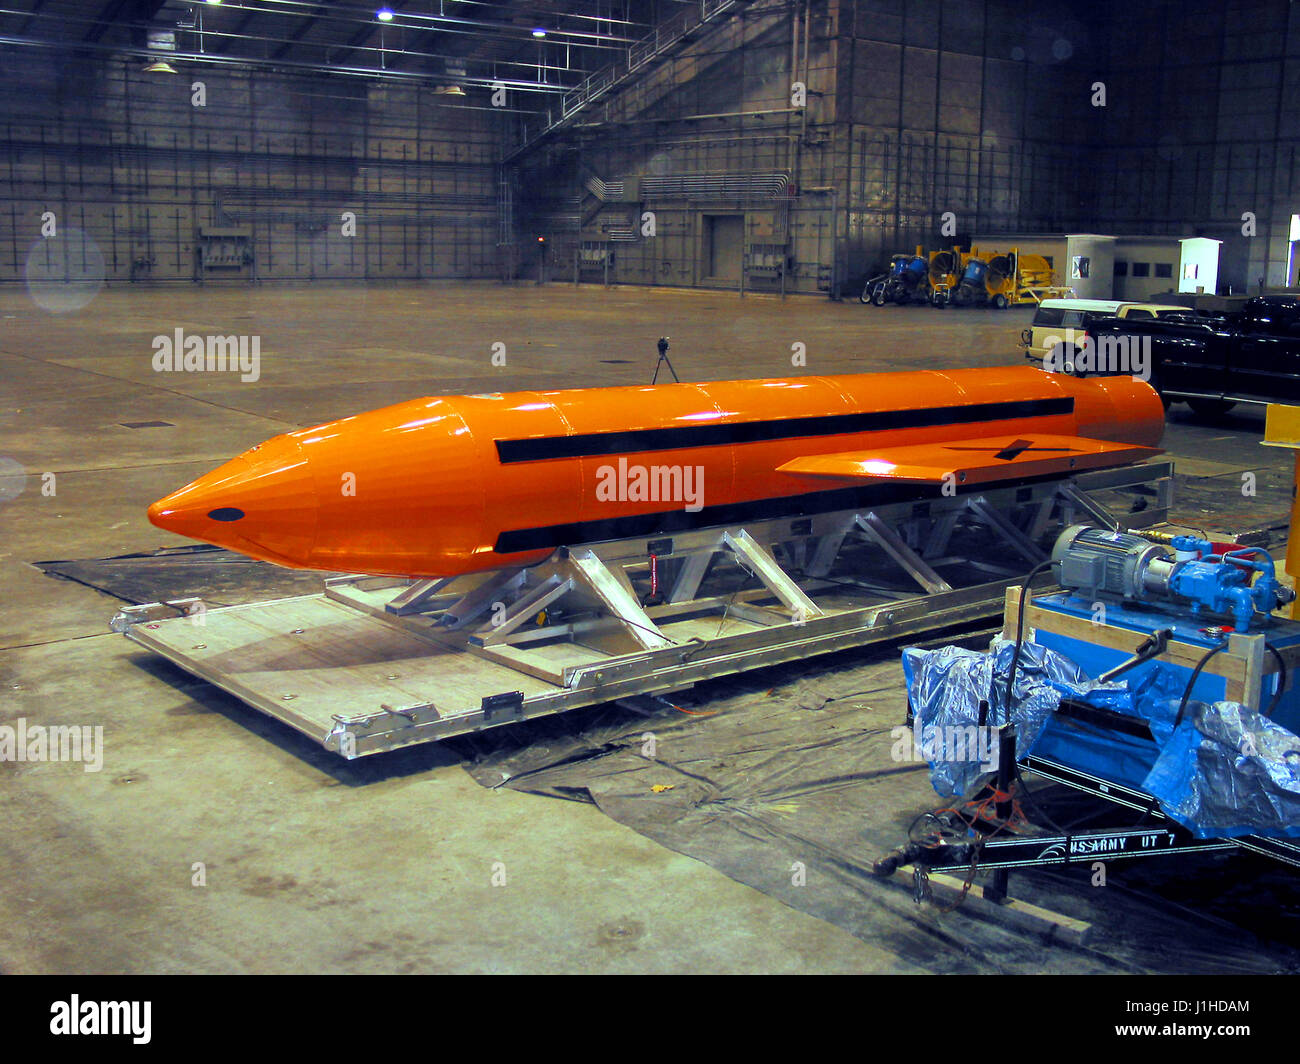 Massive Ordnance Air Blast or MOAB weapon is prepared for testing. MOAB is a precision-guided munition weighing 21,500 pounds. It will be the largest non-nuclear conventional weapon in existence. Stock Photo